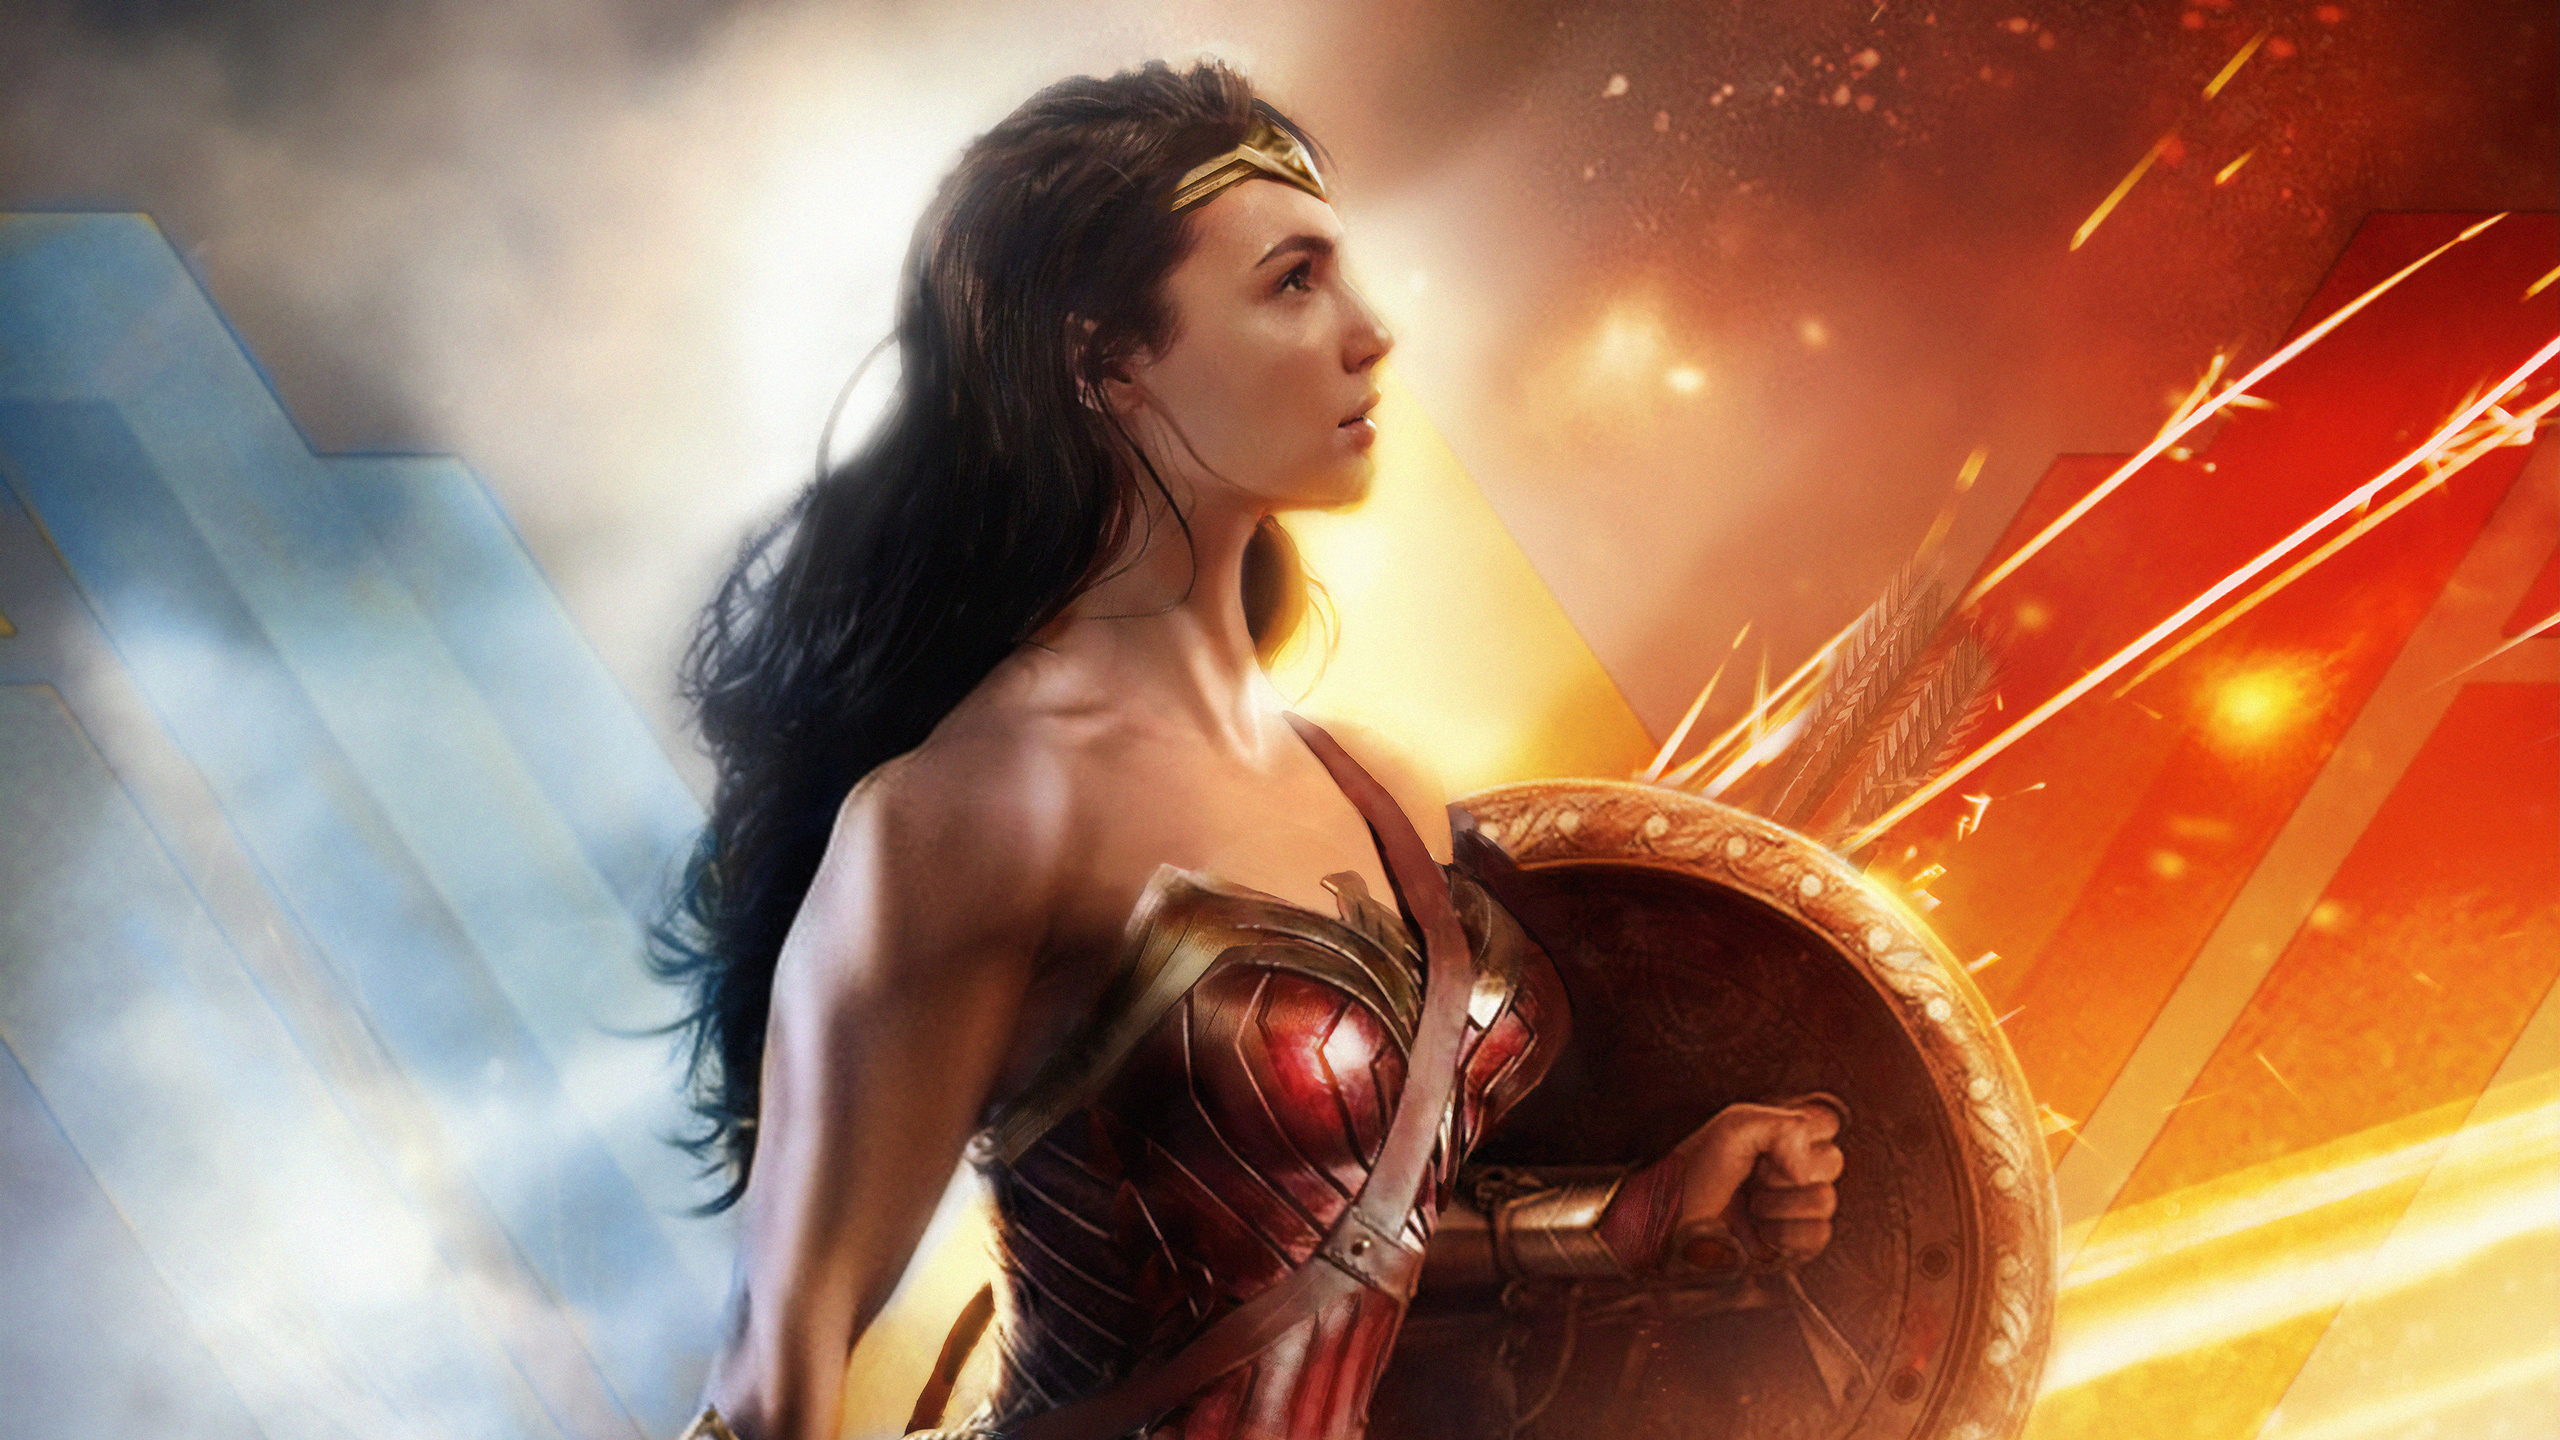 Wonder woman dc superhero hd superheroes k wallpapers images backgrounds photos and pictures